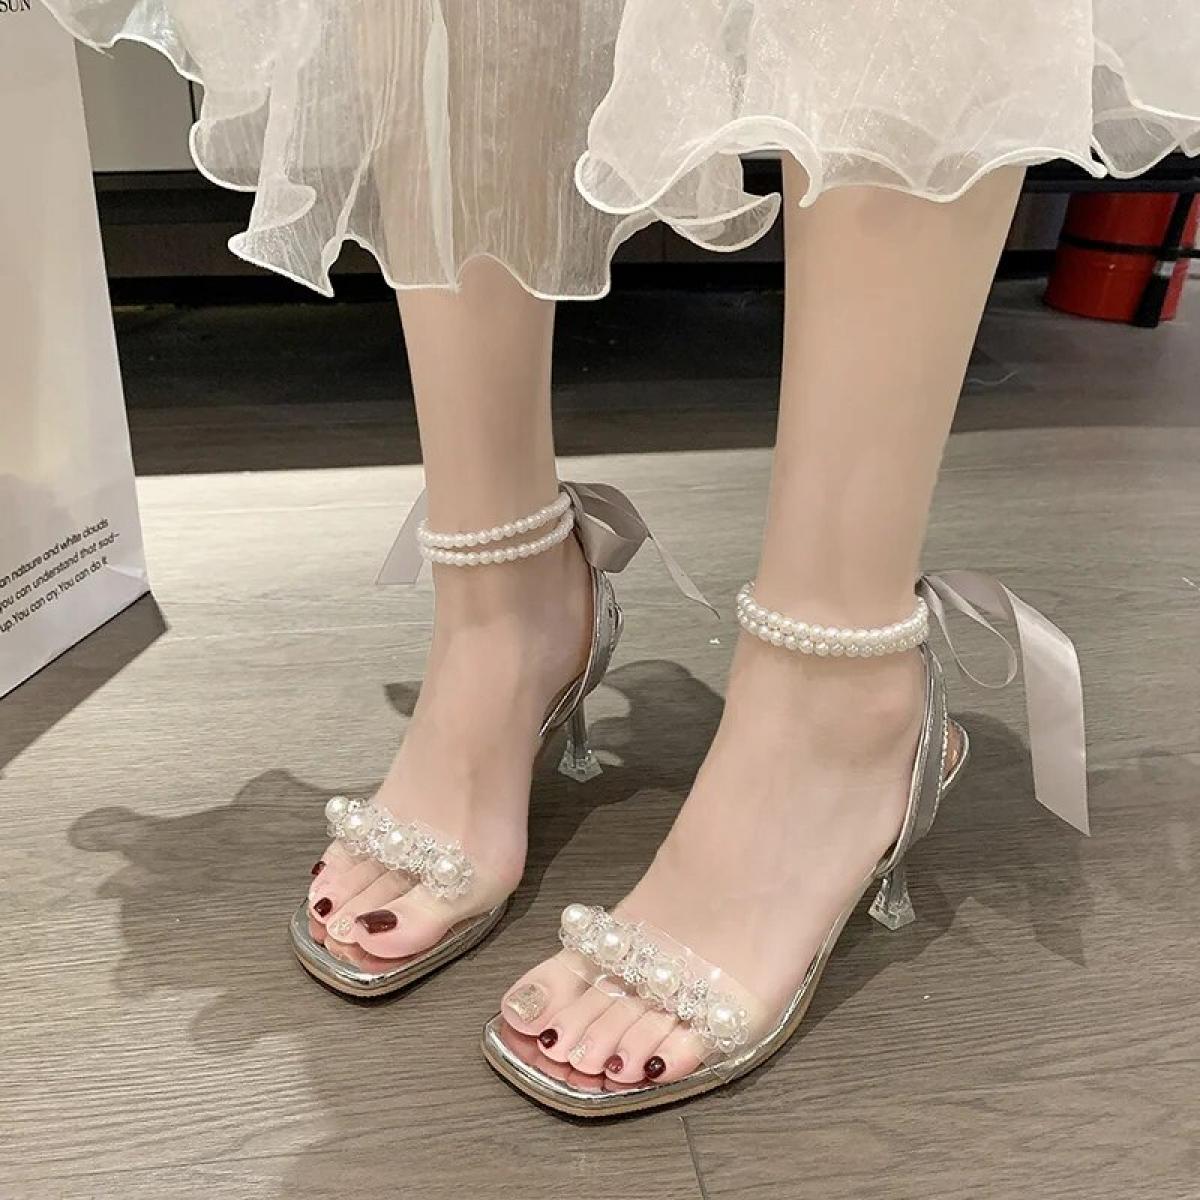 Hot Sale Shoes For Women Beaded Women's Sandals Luxurious Solid Color High Heel Shoes Ladies High Heeled Sandals Sapato 